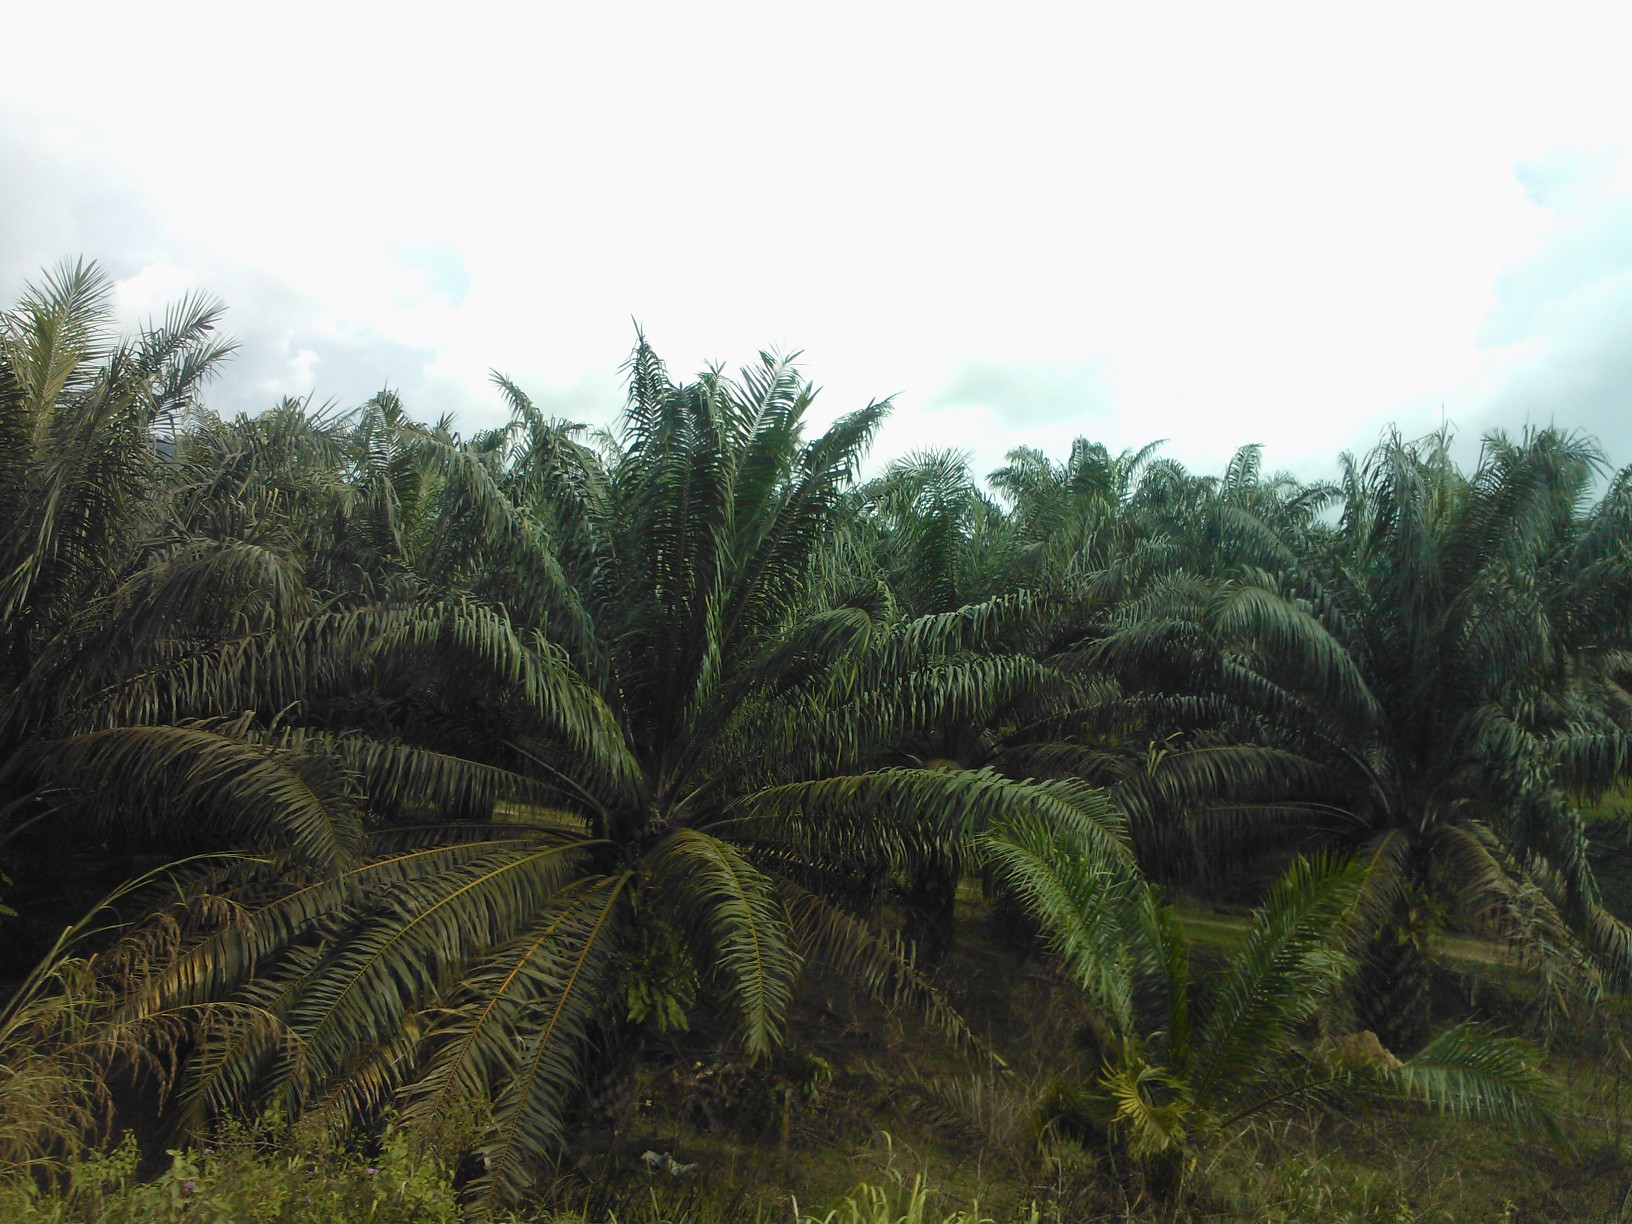 Production of palm oil often is a driver of deforestation, but not always: it depends on how the production is organized. Palm oil production is an important ecosystem service: it is used in many consumer goods. Photo: Kai Lintunen